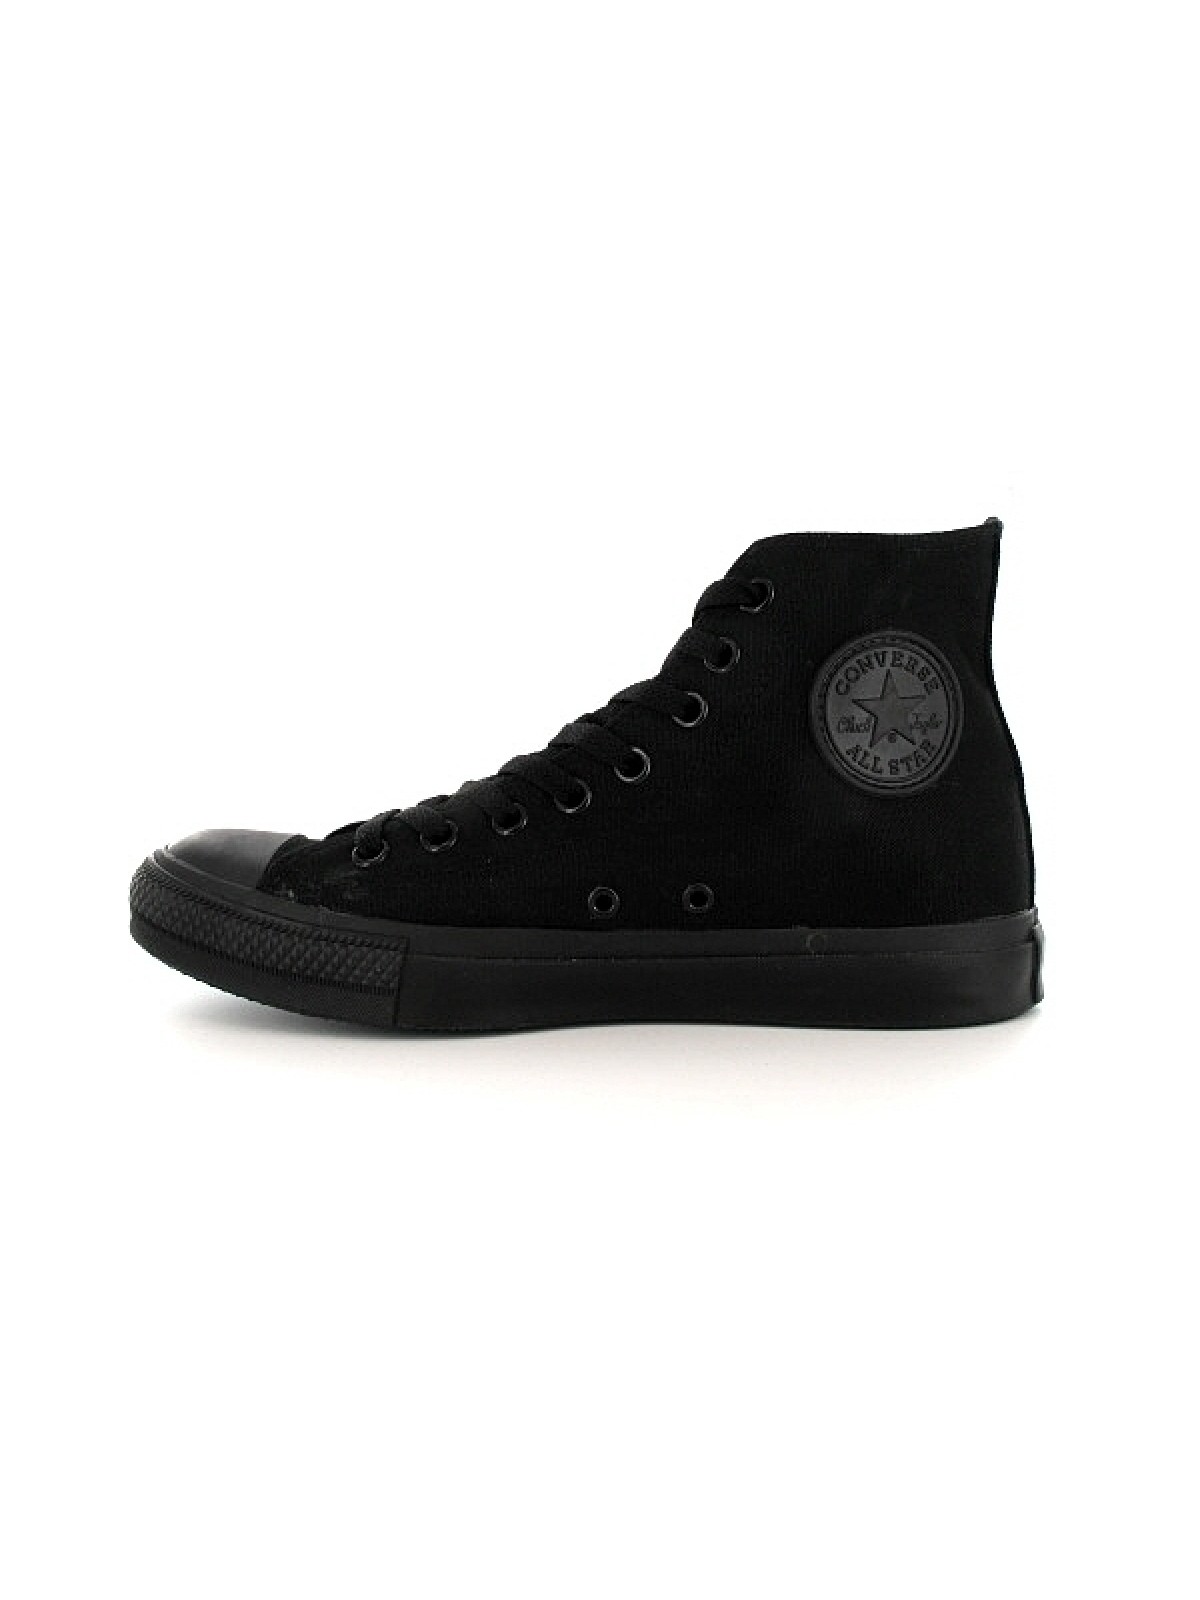 seng at styre Adept Converse Chuck Taylor all star toile monochrome noir - Marques